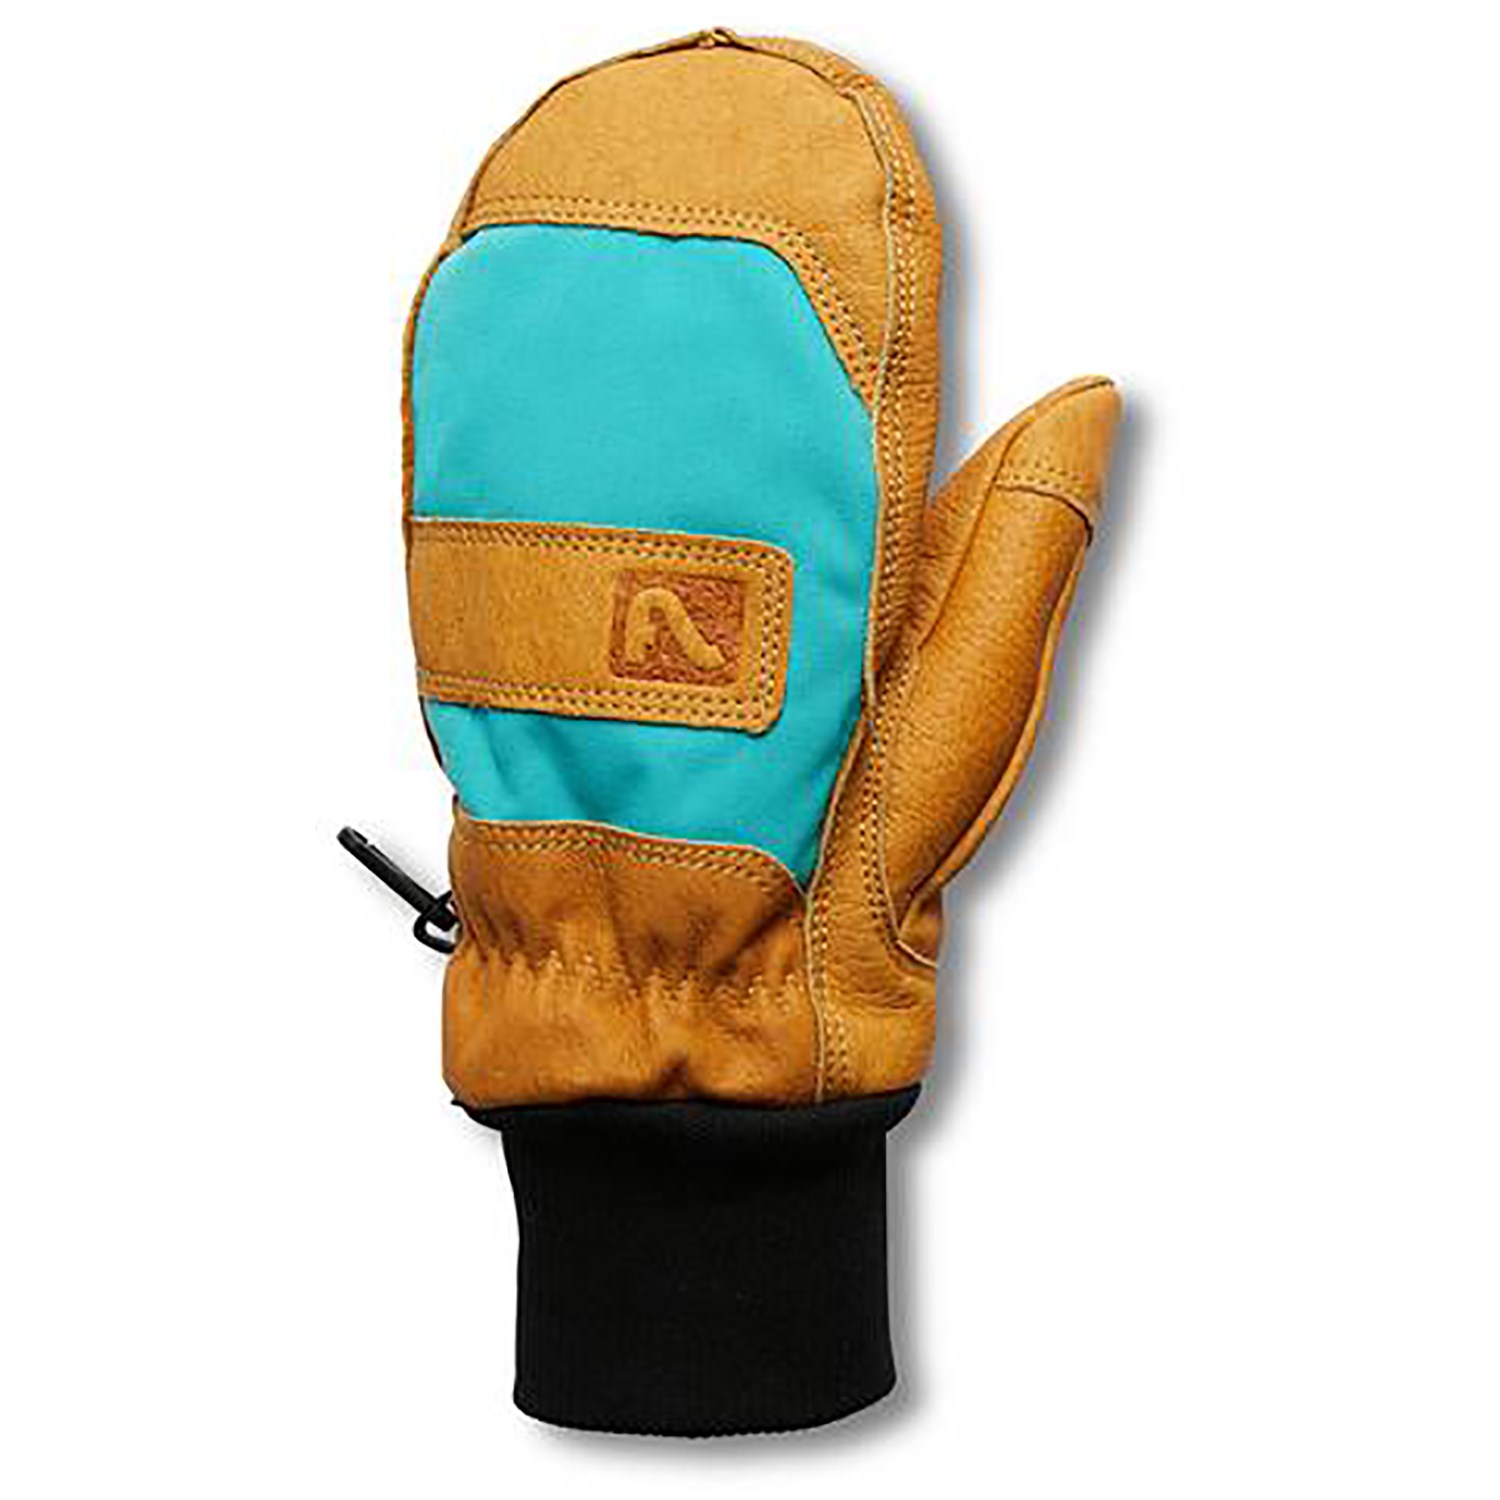 Flylow Unicorn Mitten Synthetic Insulated Waterproof Ski and Snowboard Glove 